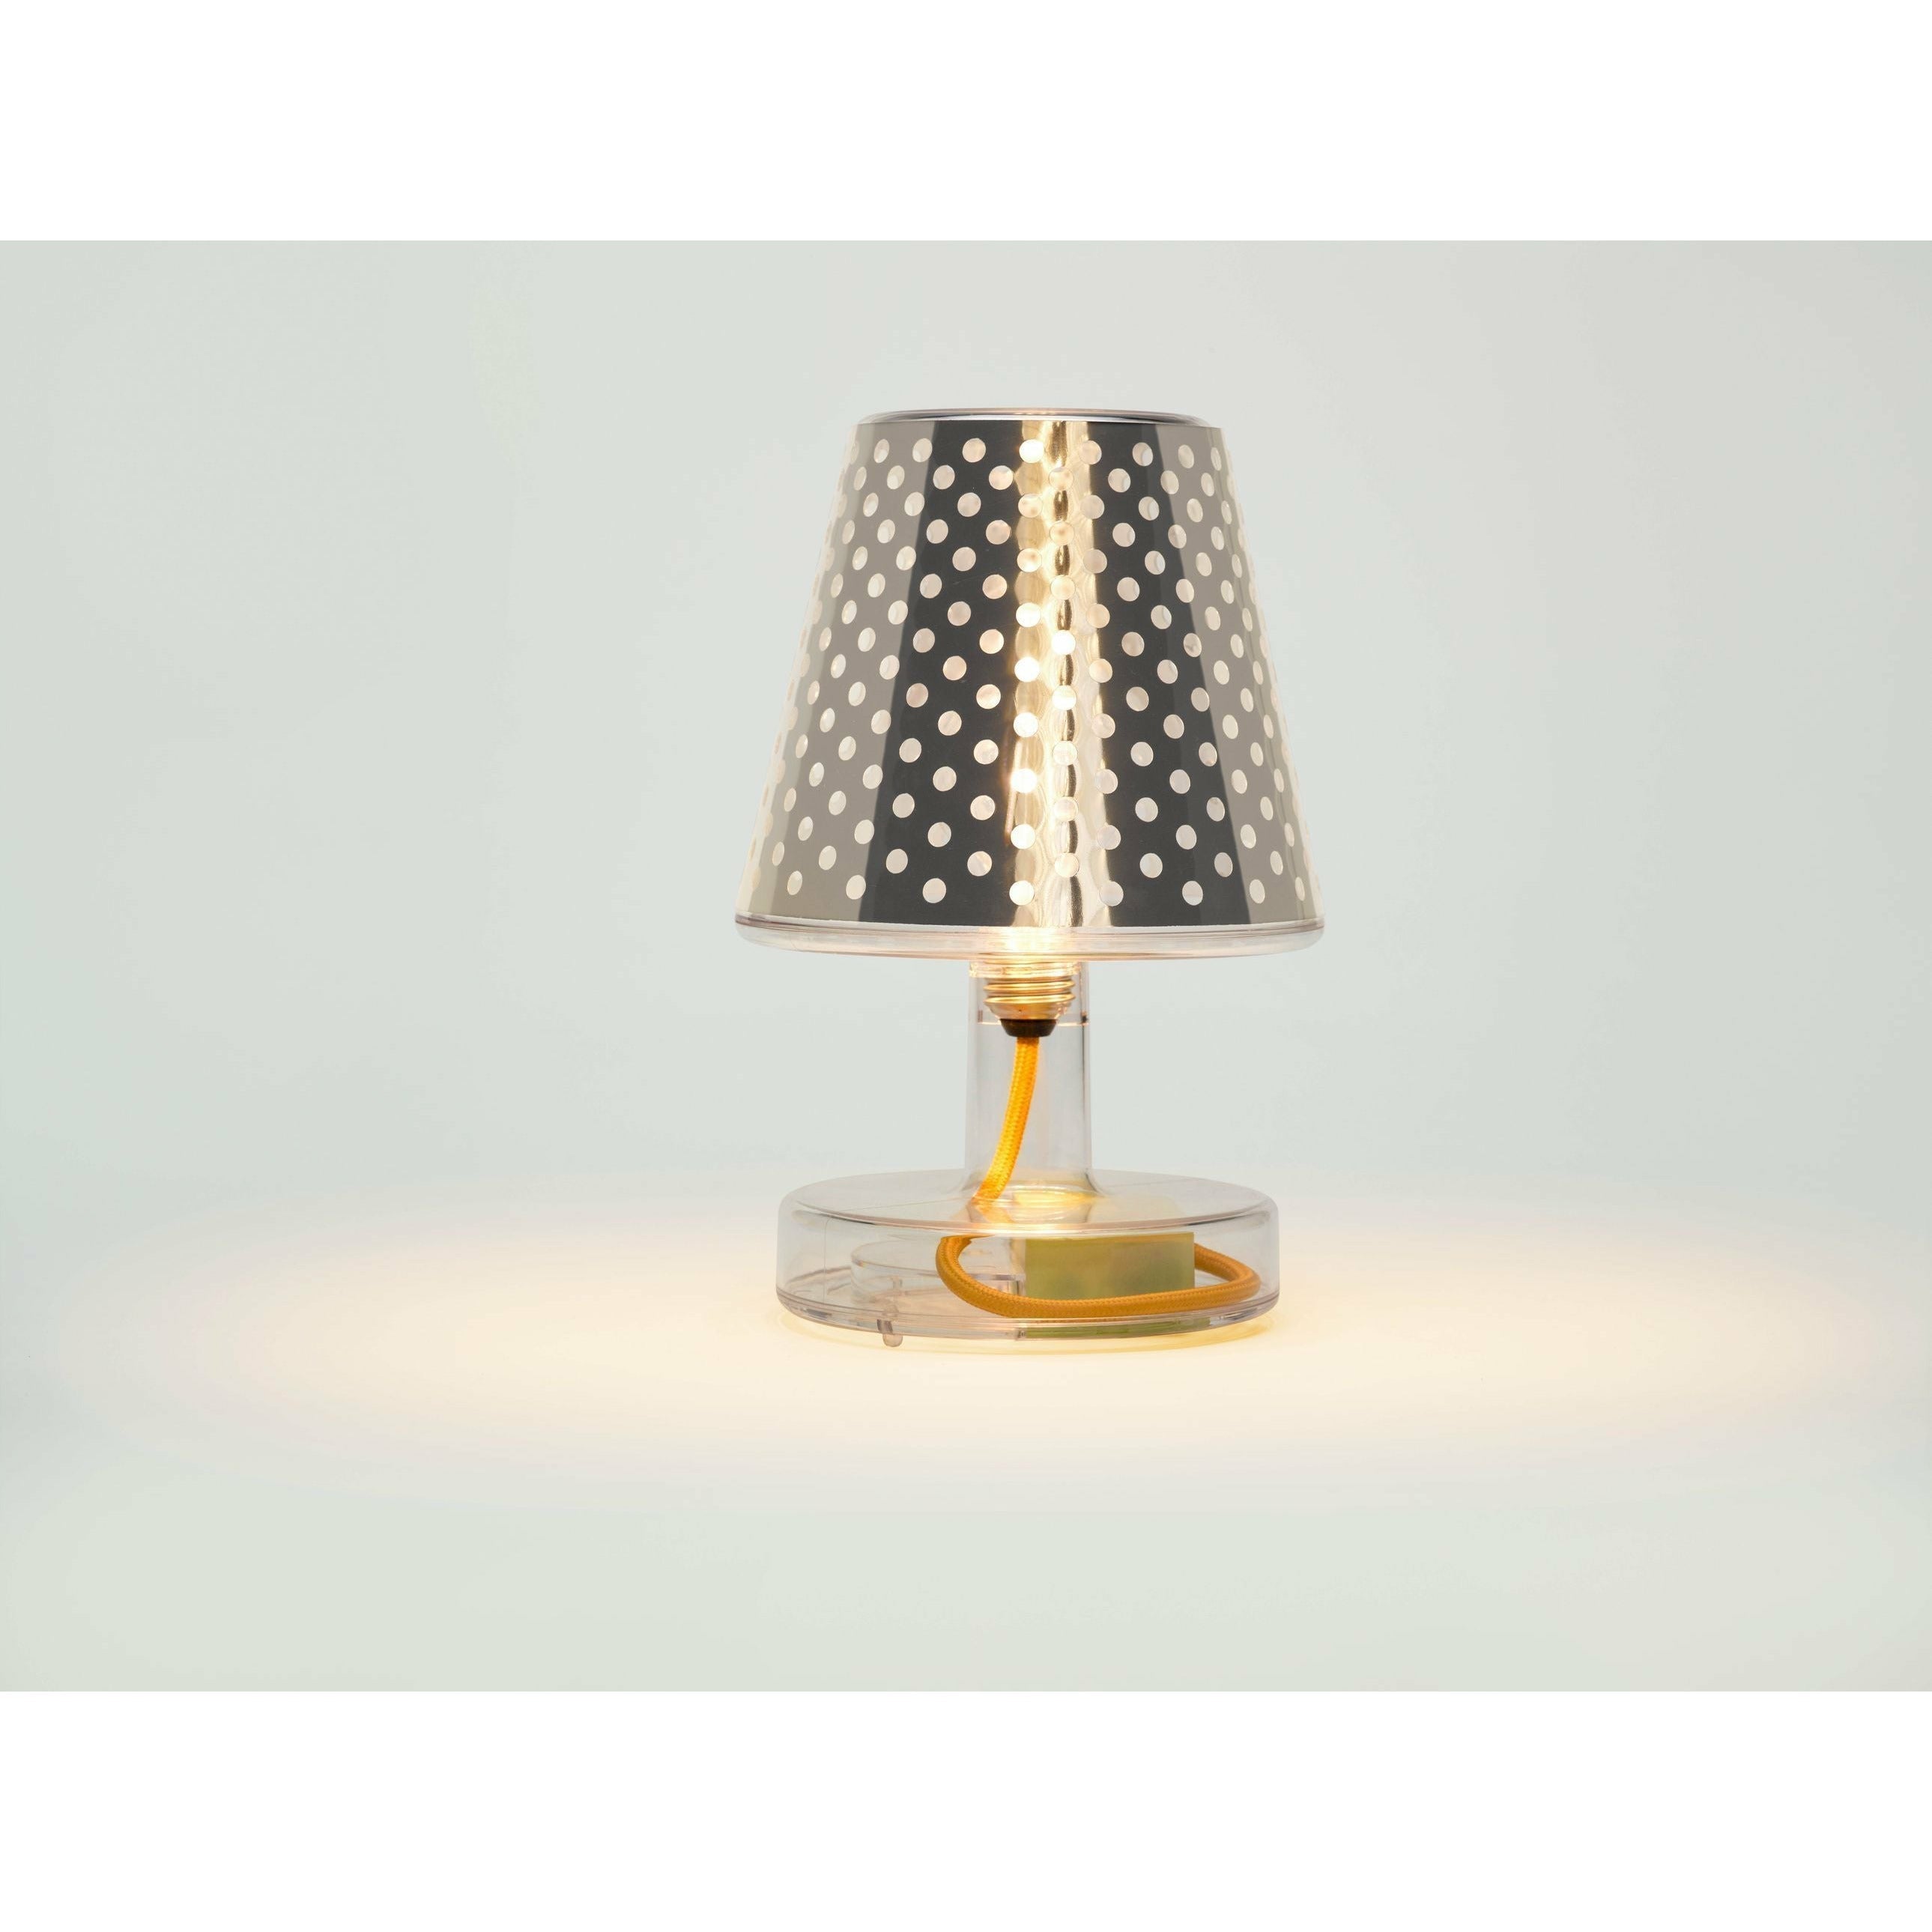 Fatboy Metallicappie Lampshade Silver Dot